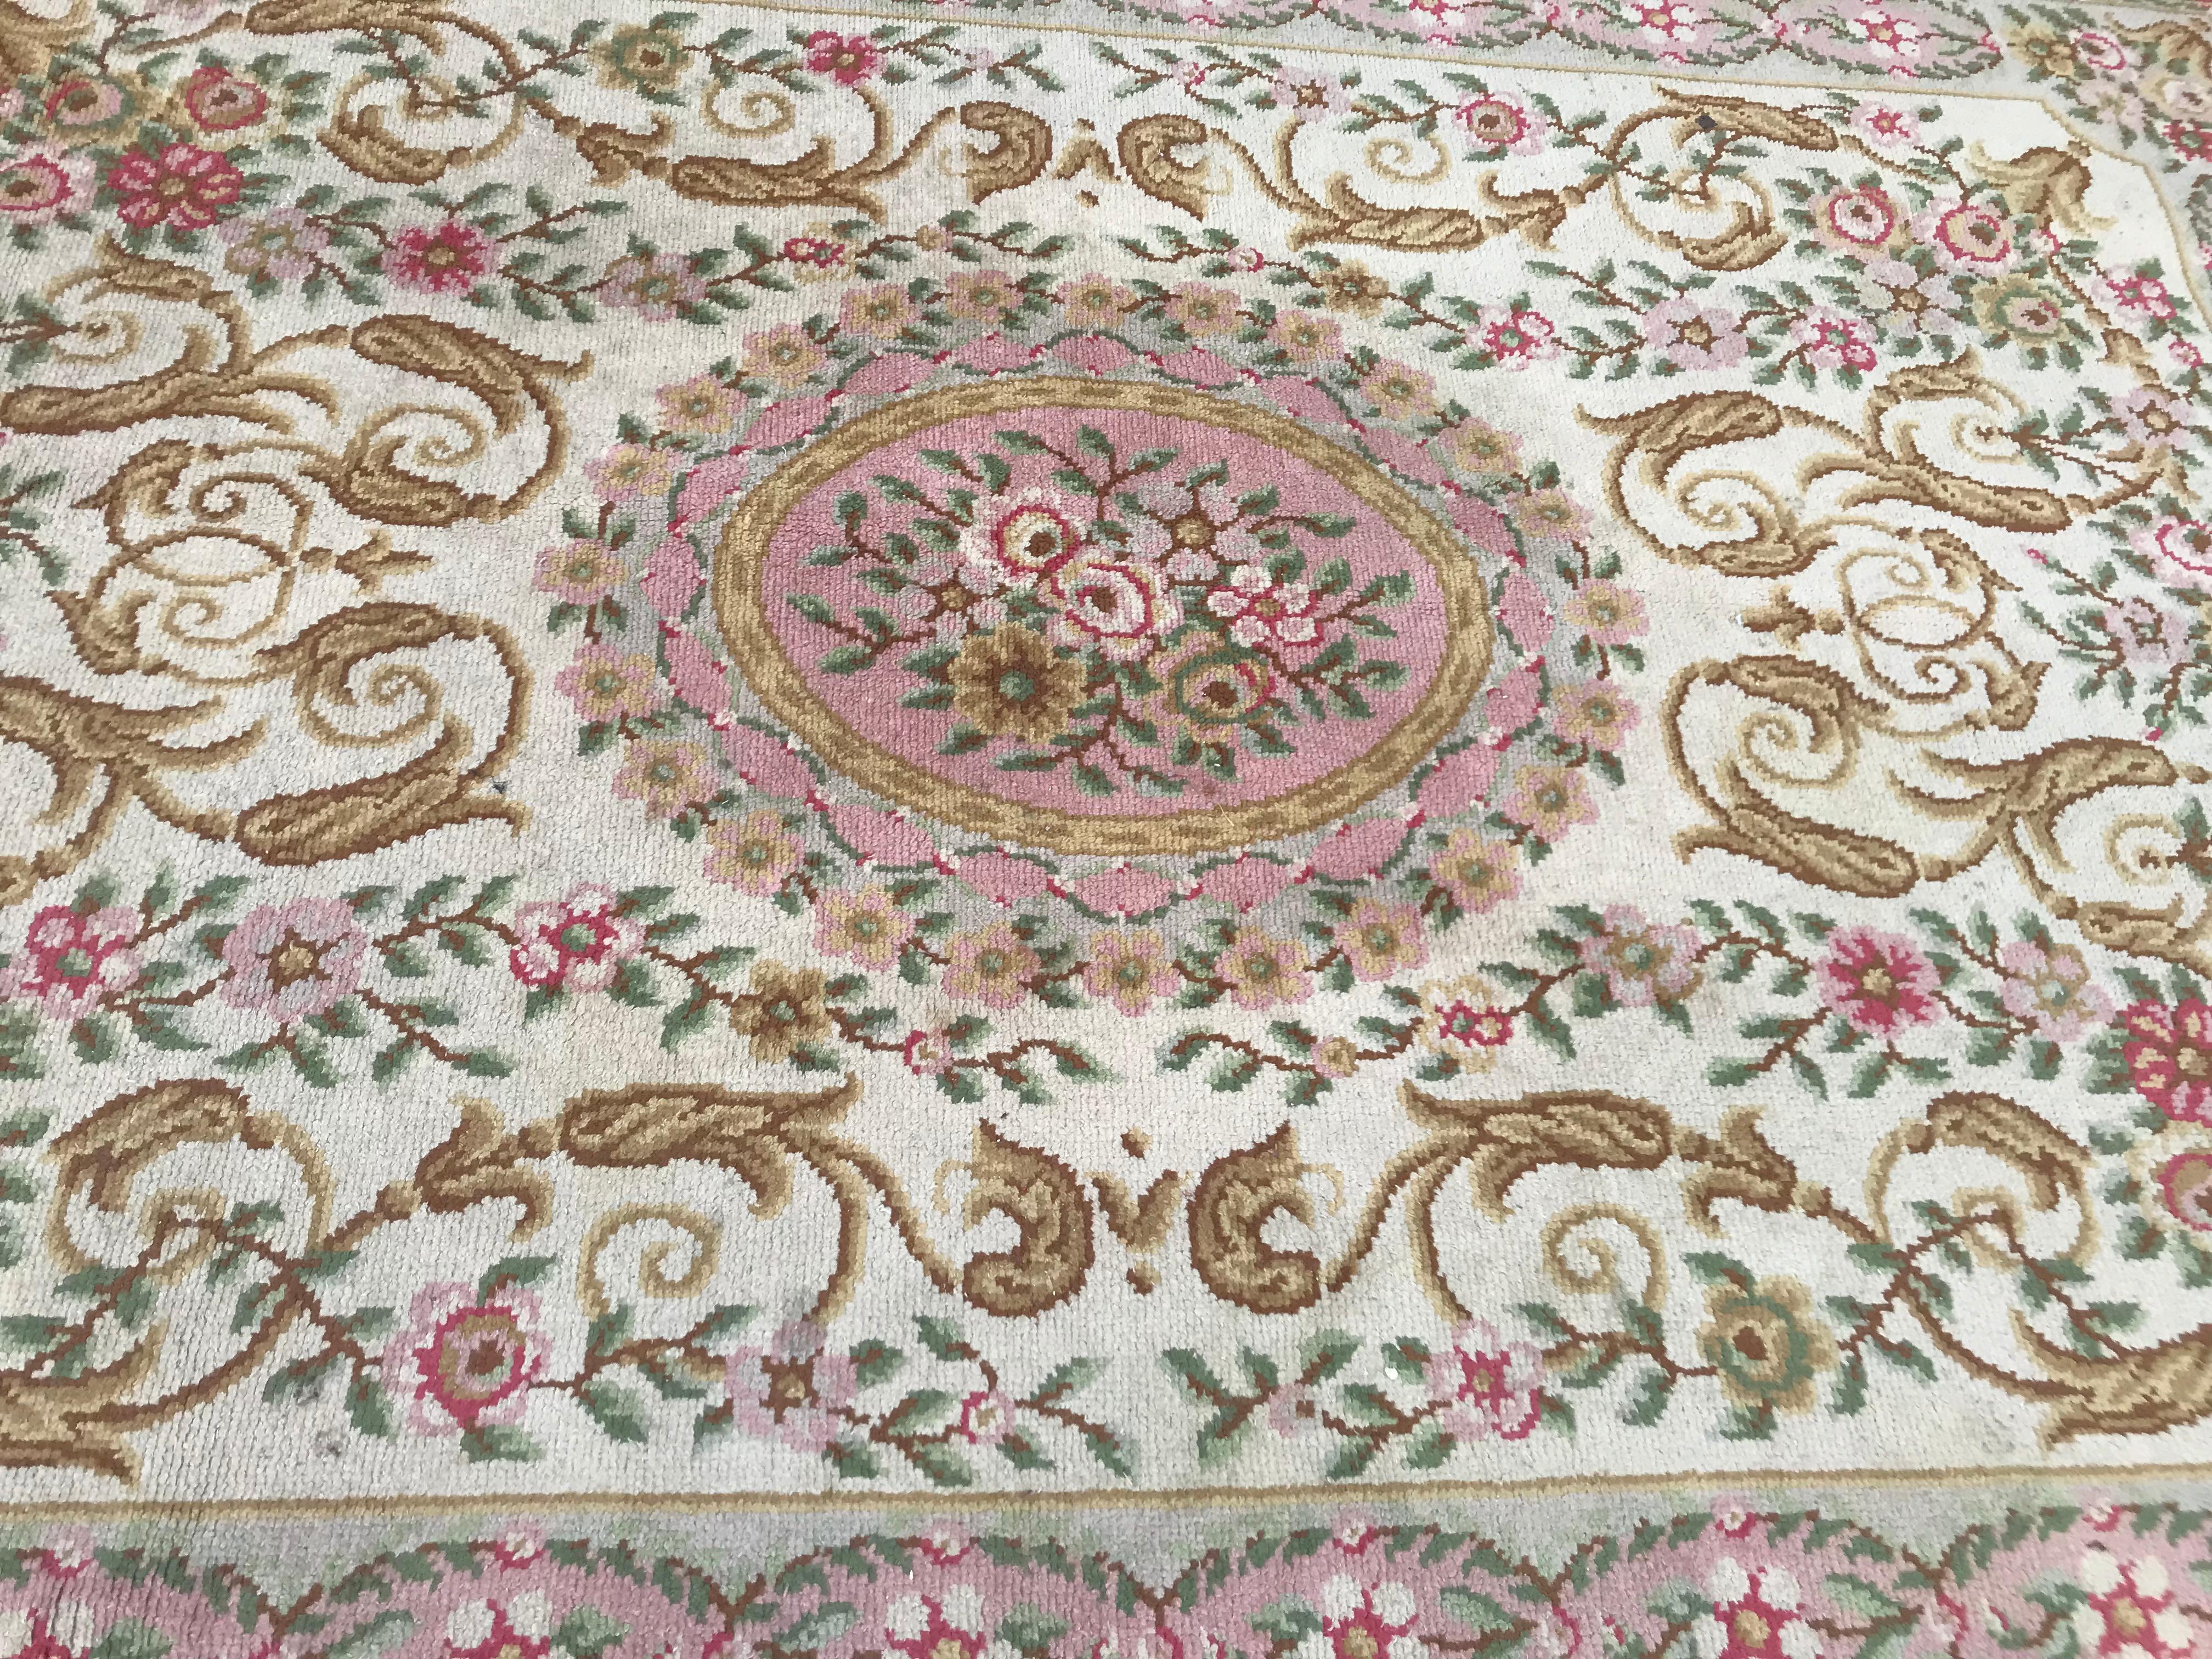 Hand-Knotted Nice Antique Knotted Aubusson Rug